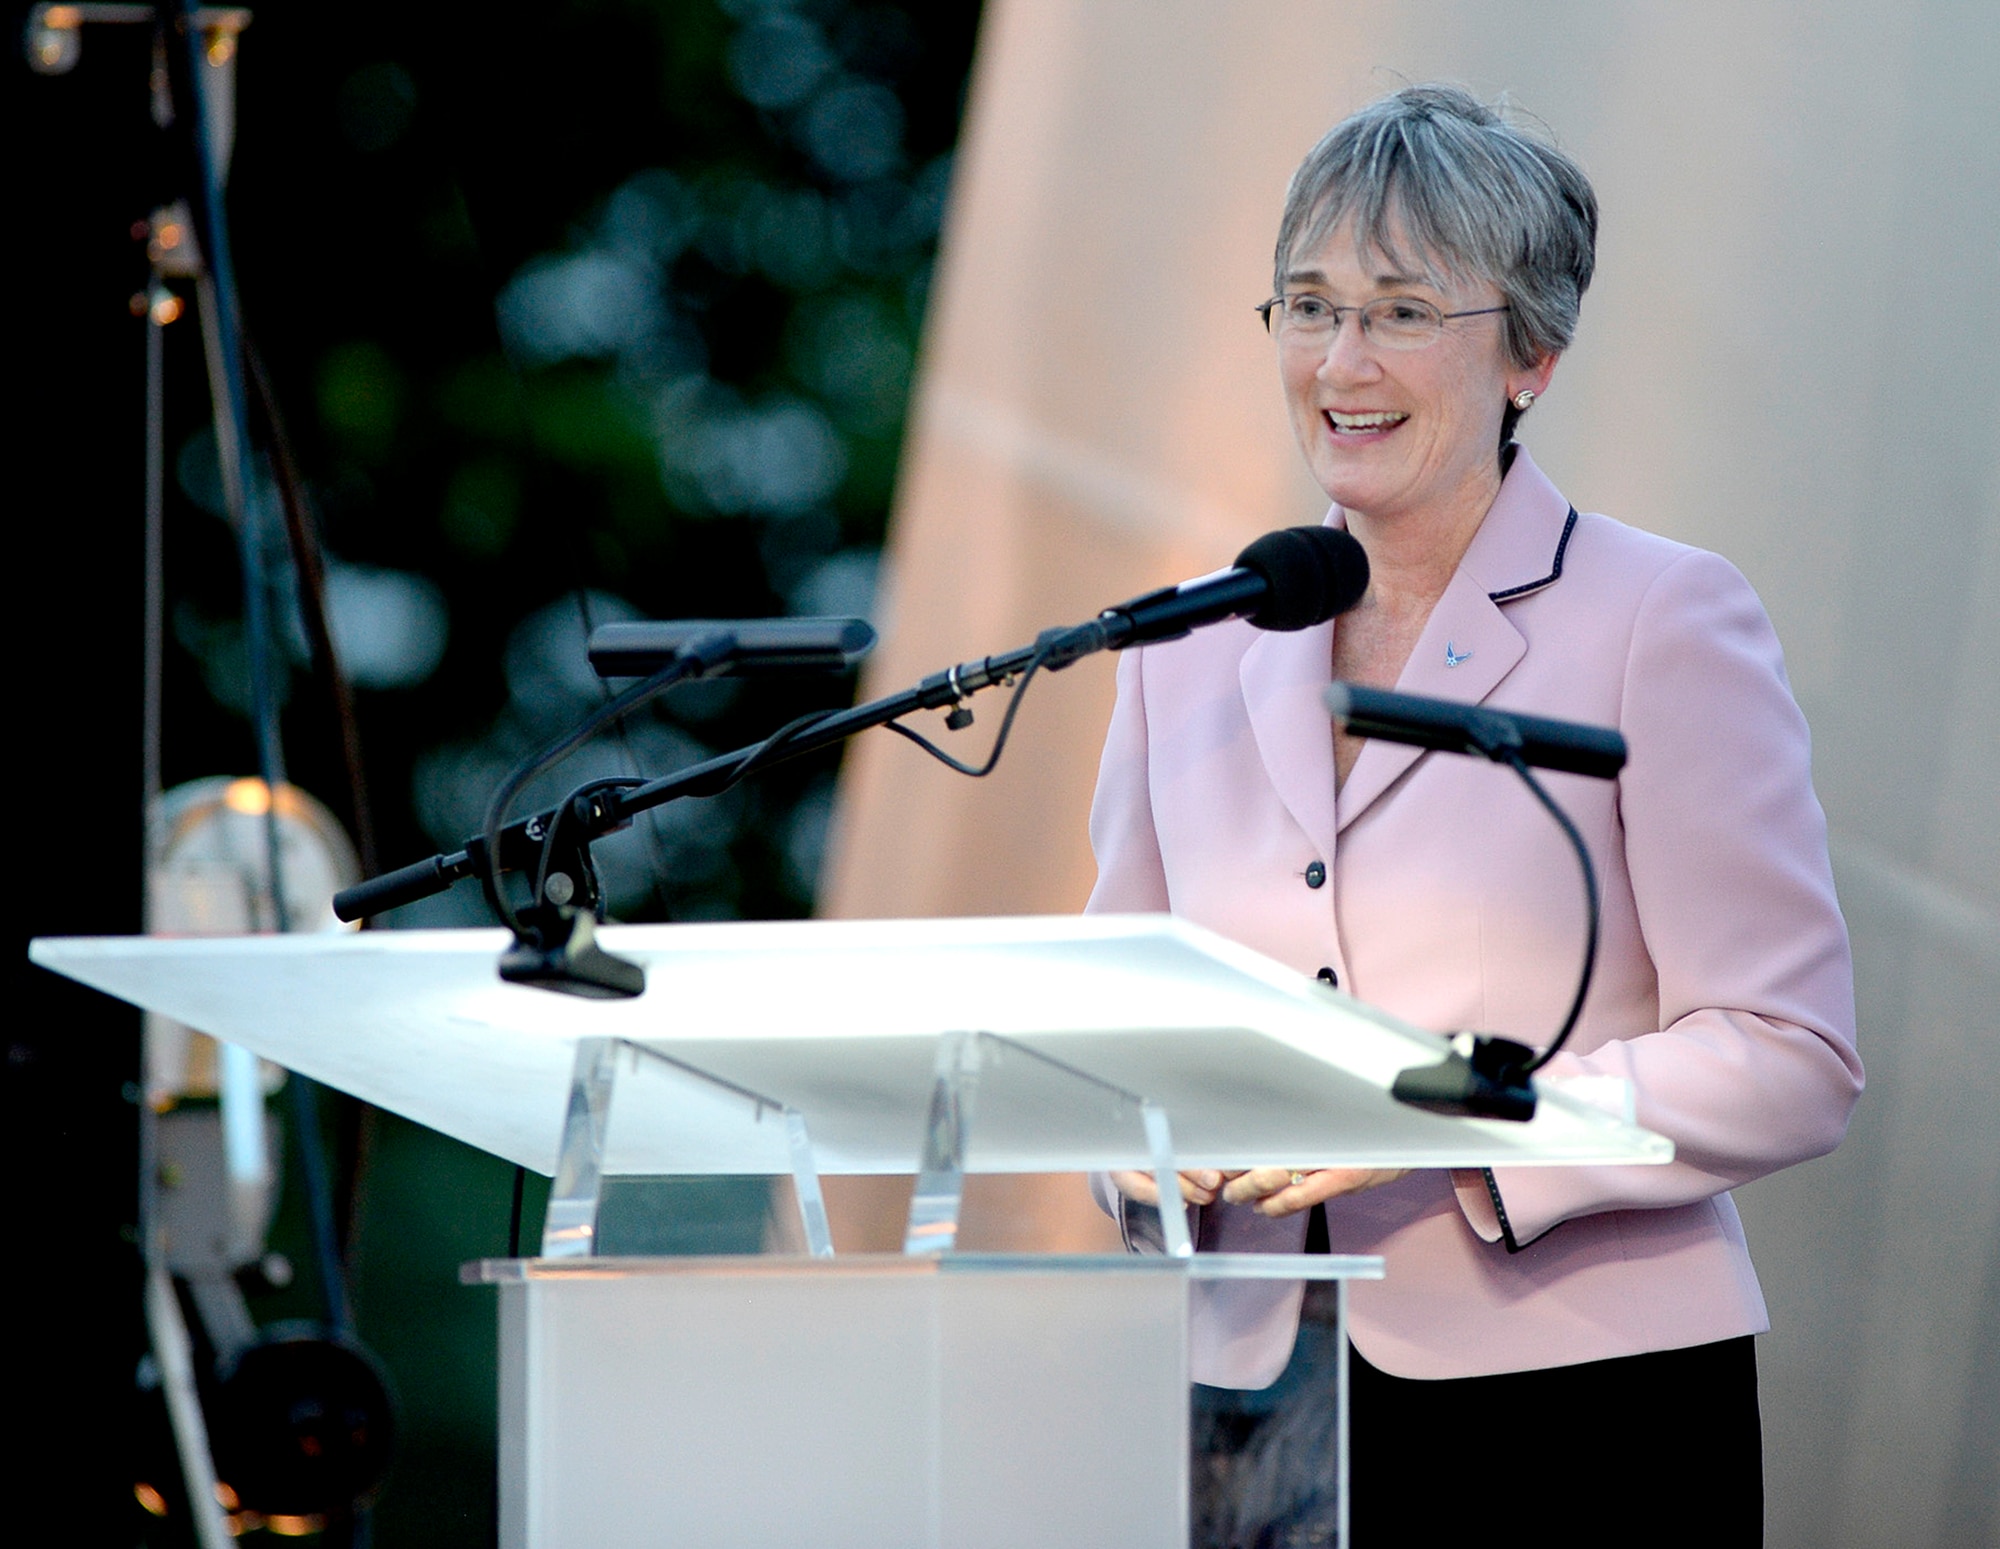 Secretary of the Air Force Heather Wilson talks about the history and the future of the Air Force during the Heritage to Horizons concert at the Air Force Memorial in Arlington, Va., May 17, 2017. (U.S. Air Force photo/Andy Morataya)